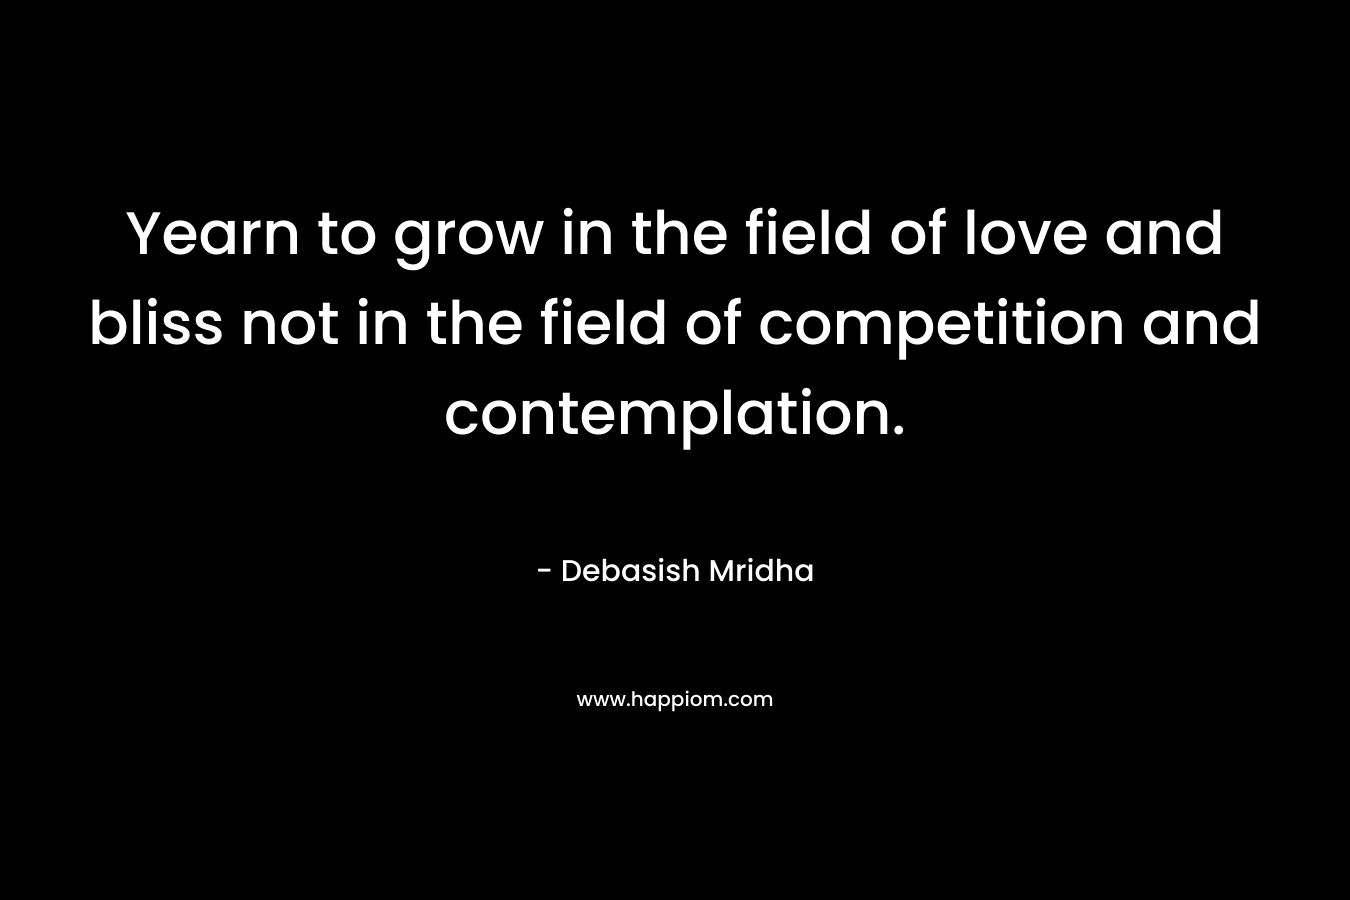 Yearn to grow in the field of love and bliss not in the field of competition and contemplation. – Debasish Mridha